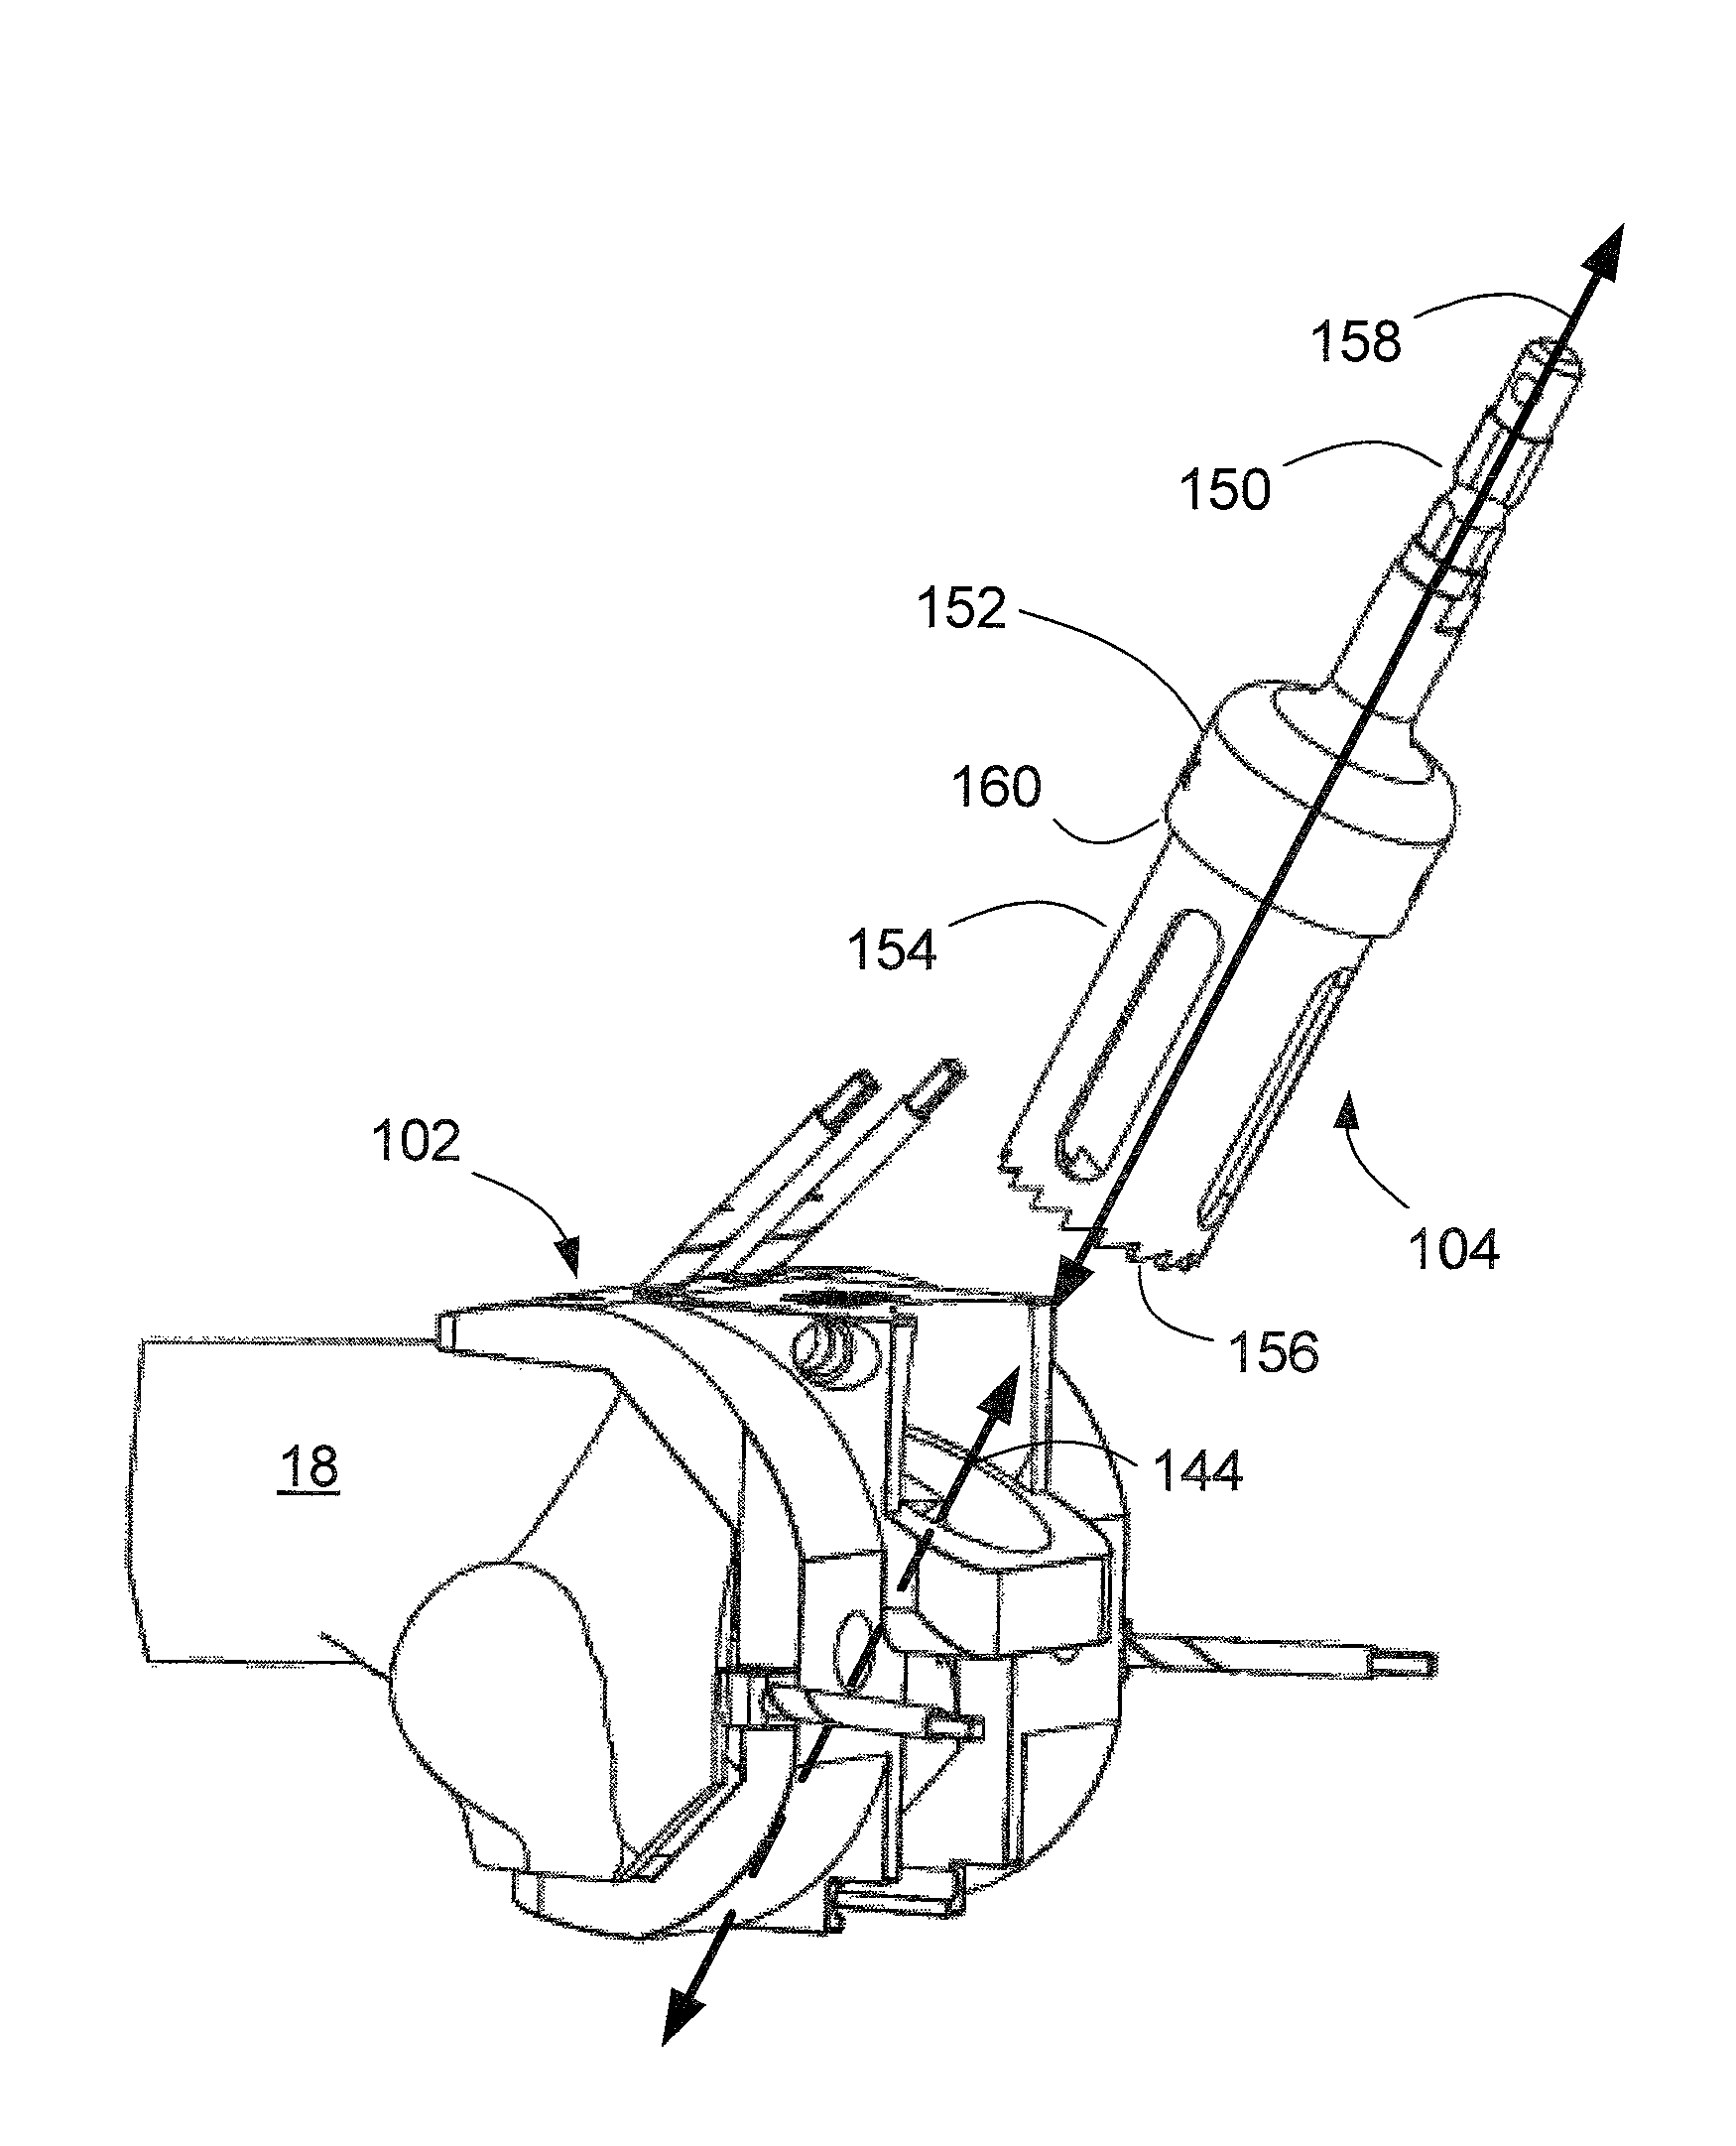 Methods and apparatus for preparing an intercondylar area of a distal femur